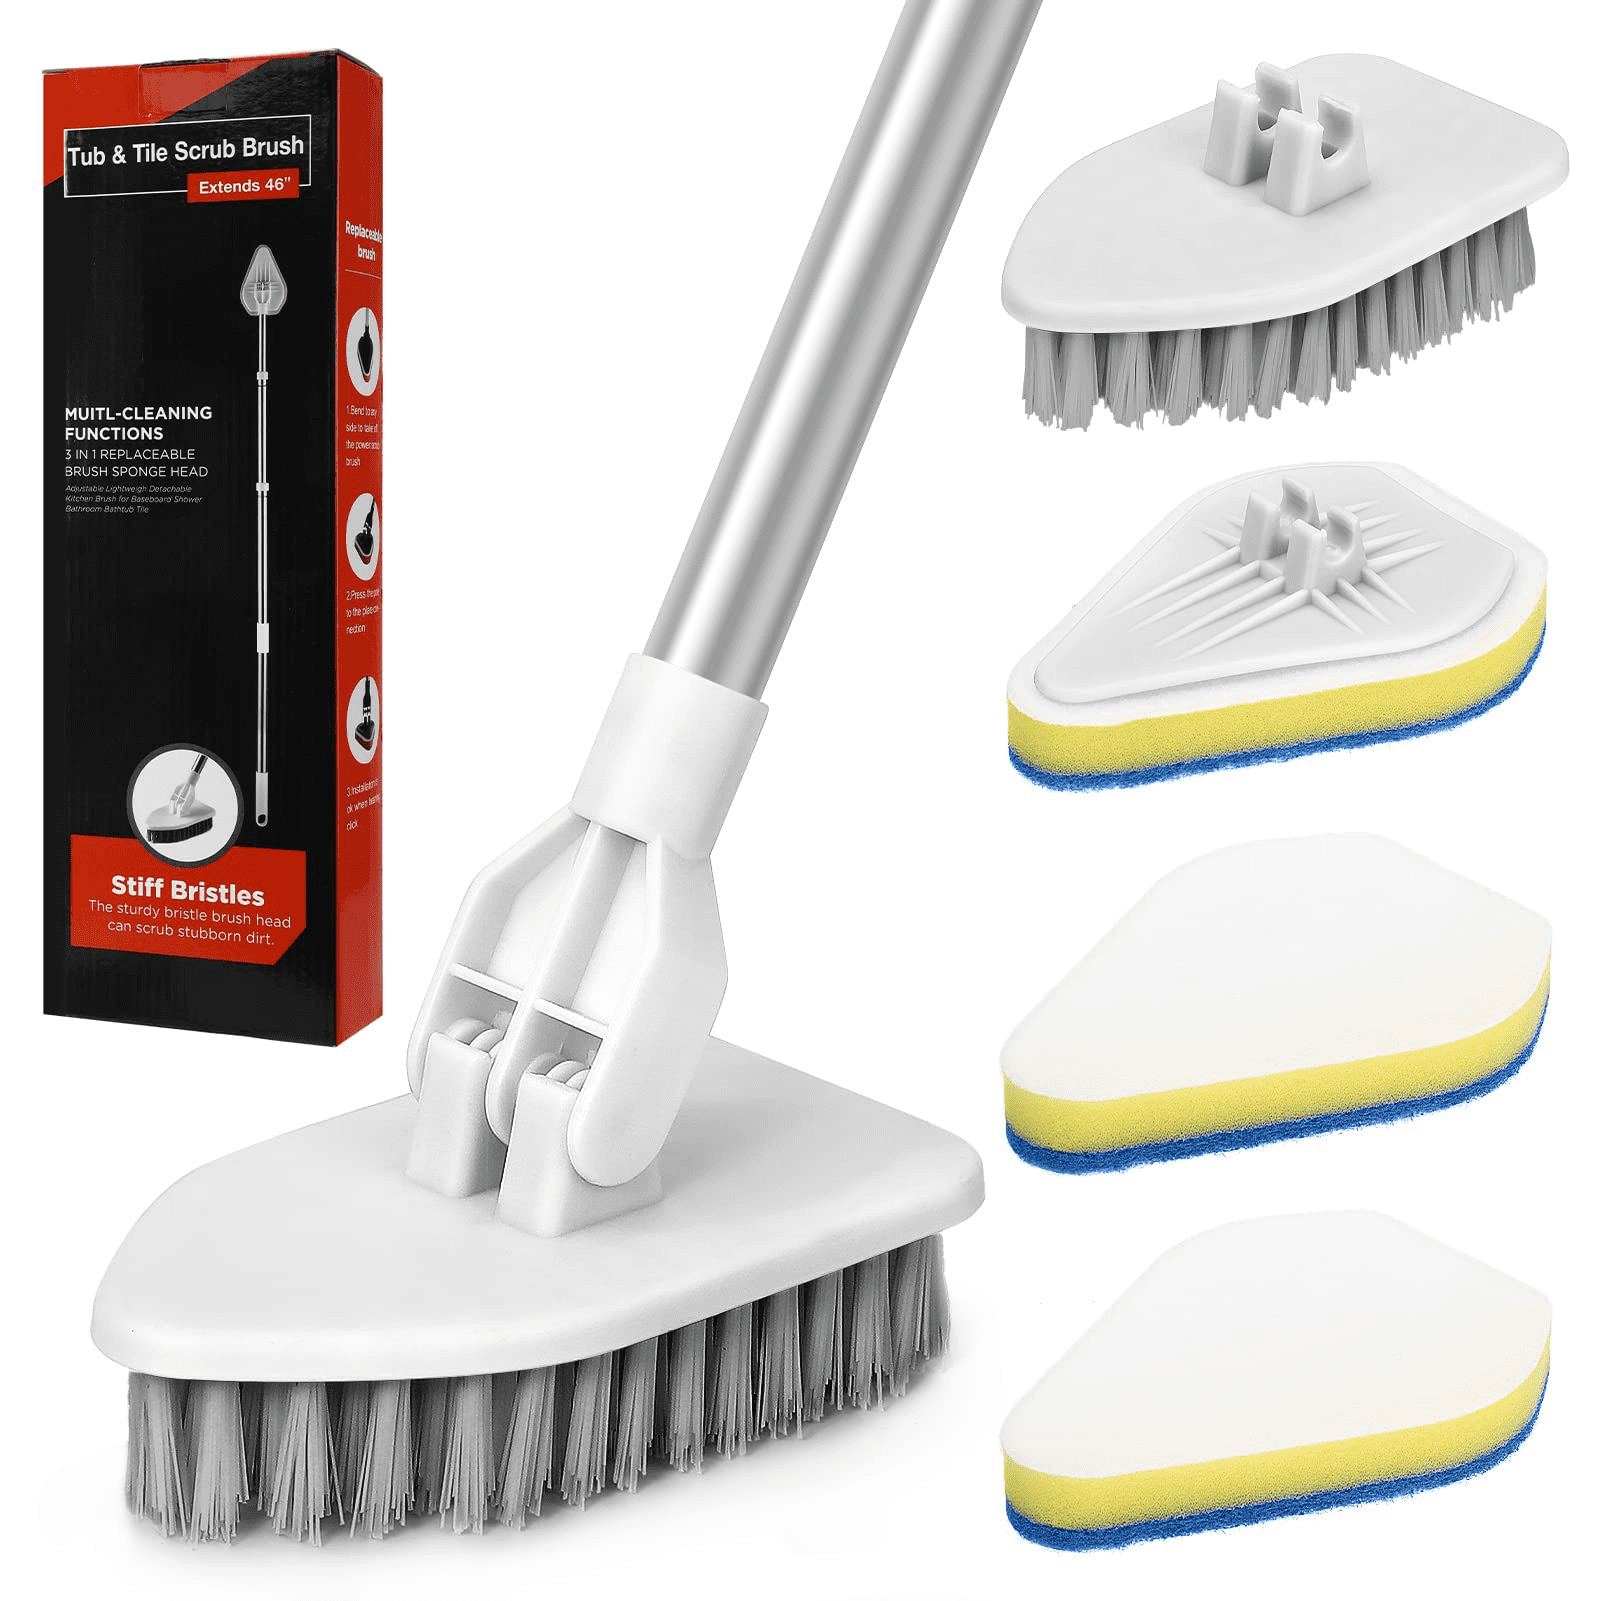 Shower Scrubber for Cleaning,Bathroom Scrubber with Long Handle,2 in 1 Tub  and Tile Scrubber Brush,Bathroom Cleaning Supplies Floor Scrubber Baseboard